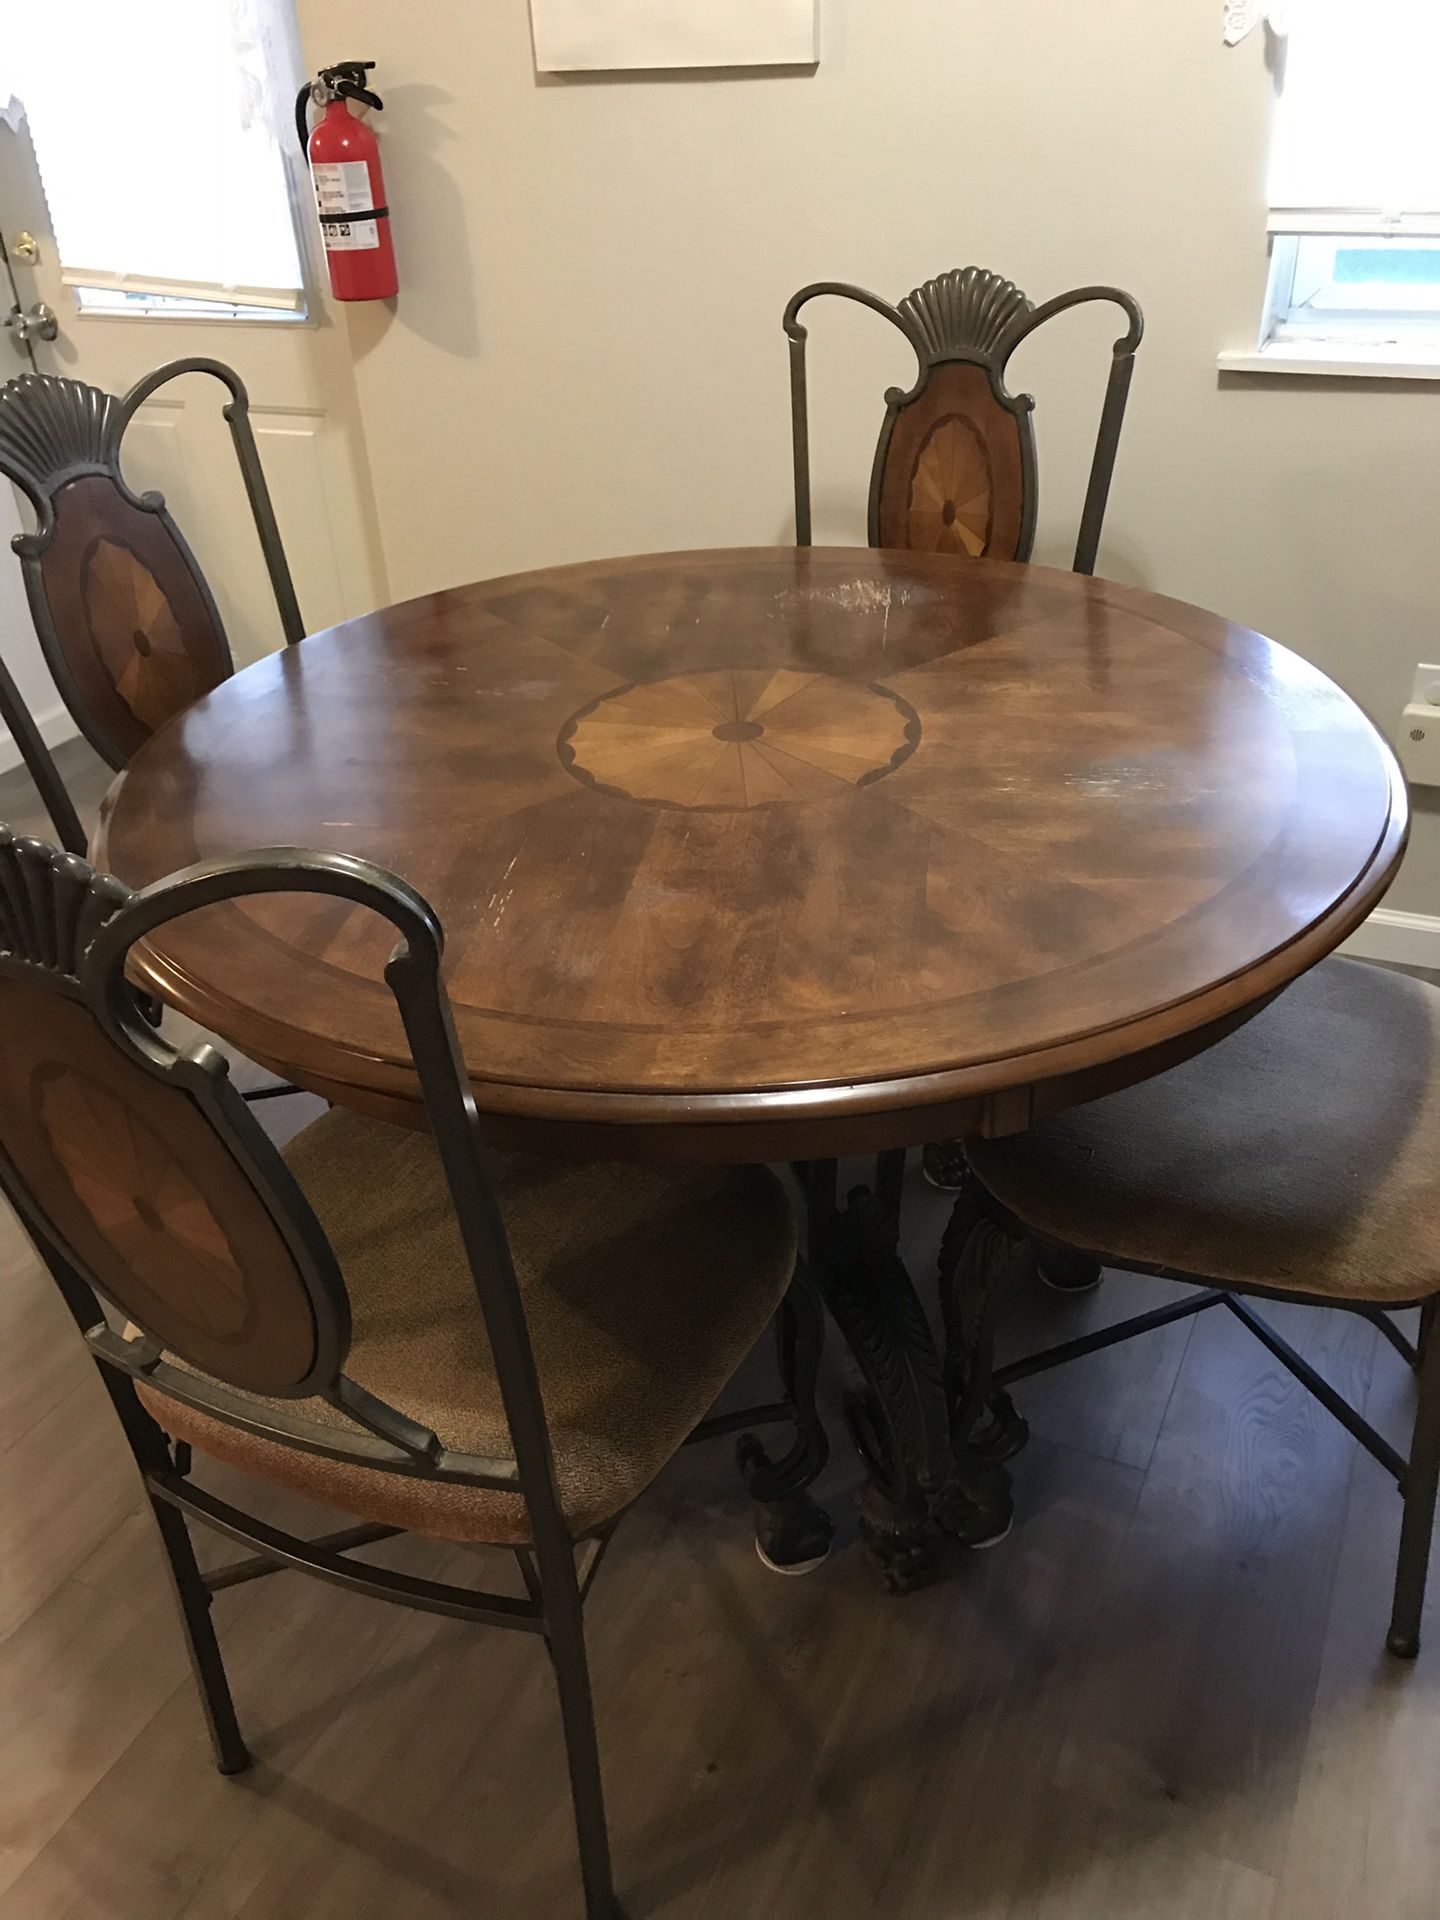 Dining room table,chairs & buffet